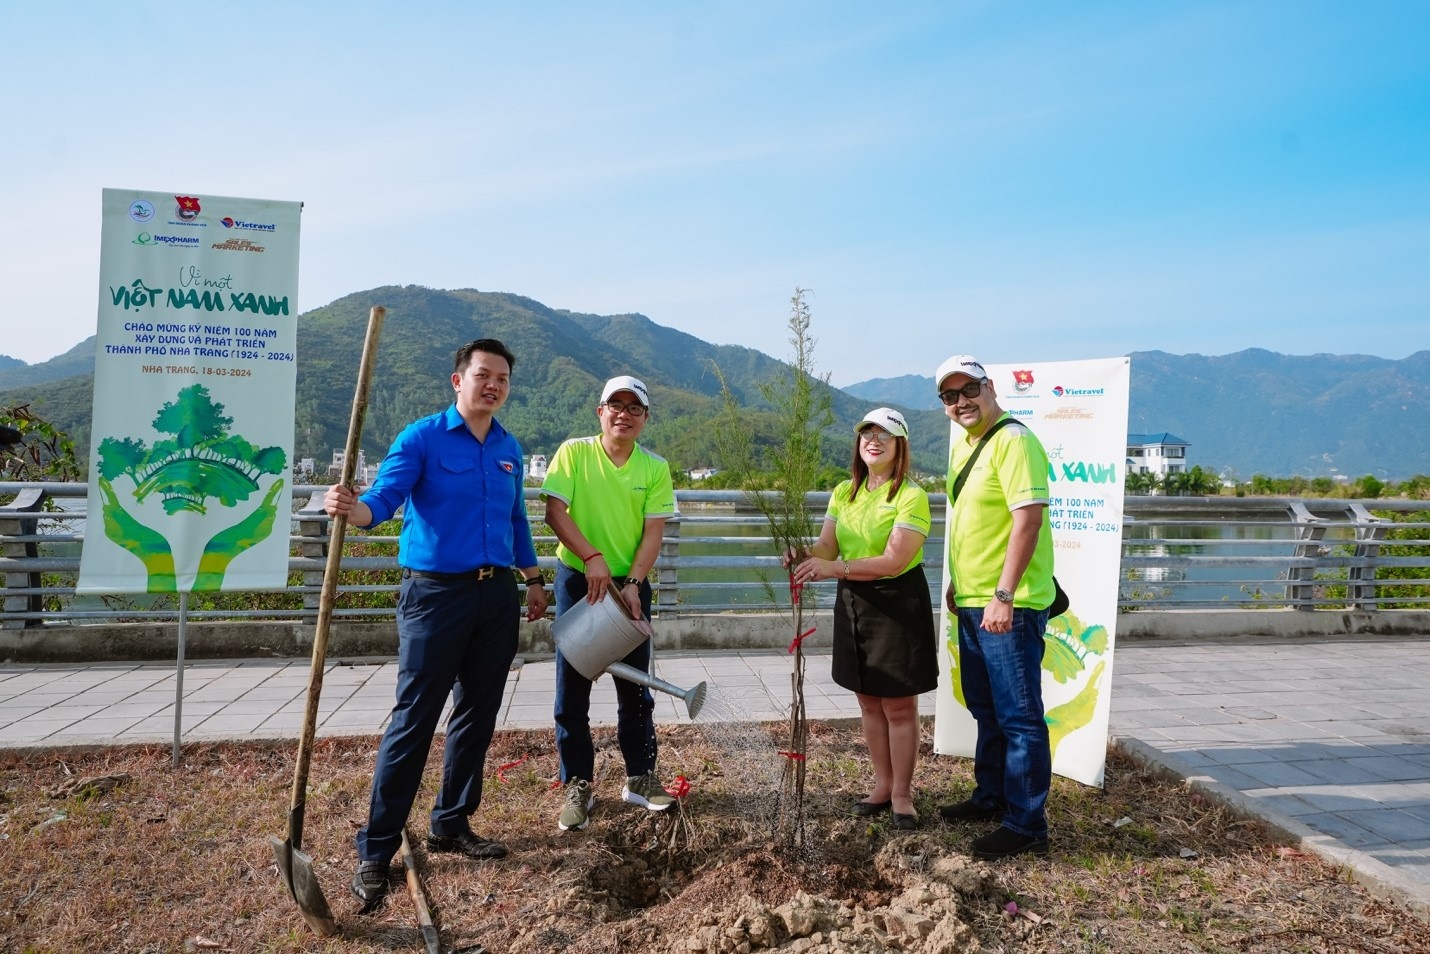 Imexpharm joins Vietnam's campaign to plant one billion trees